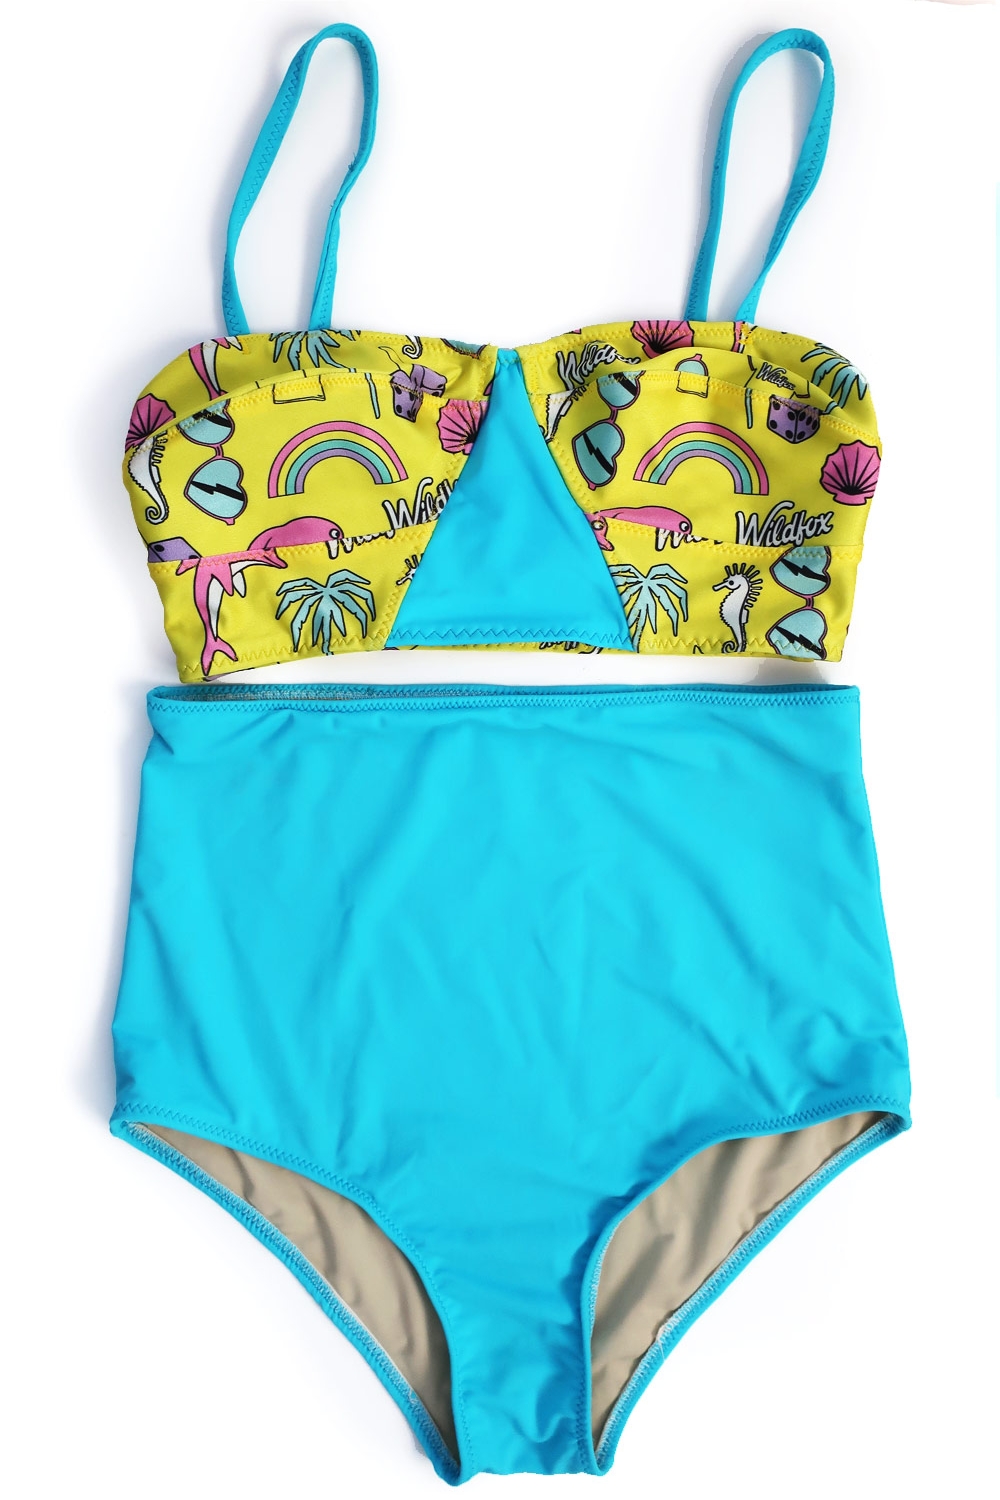 DIY High Waisted Bikini – Review of the Soma Swimsuit by Papercut Patterns  — Sew DIY